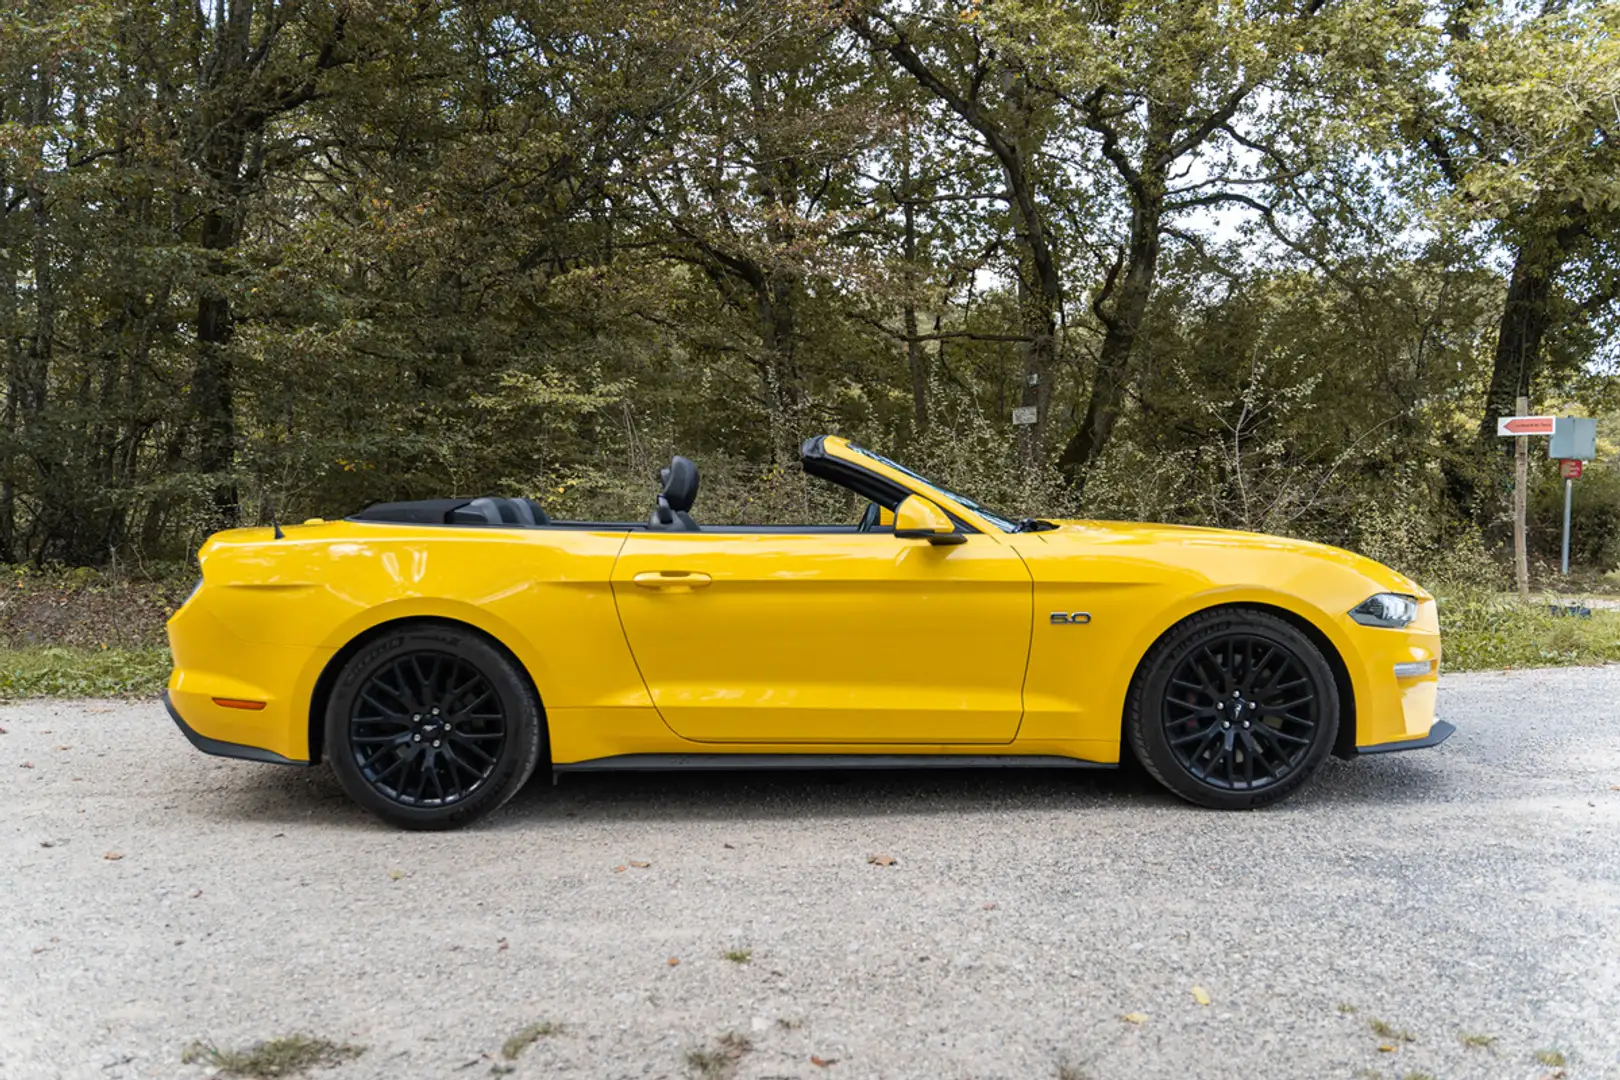 Ford Mustang Cabriolet V8 5.0 450 ch - 12 900km - 2018 - Immat  Yellow - 2